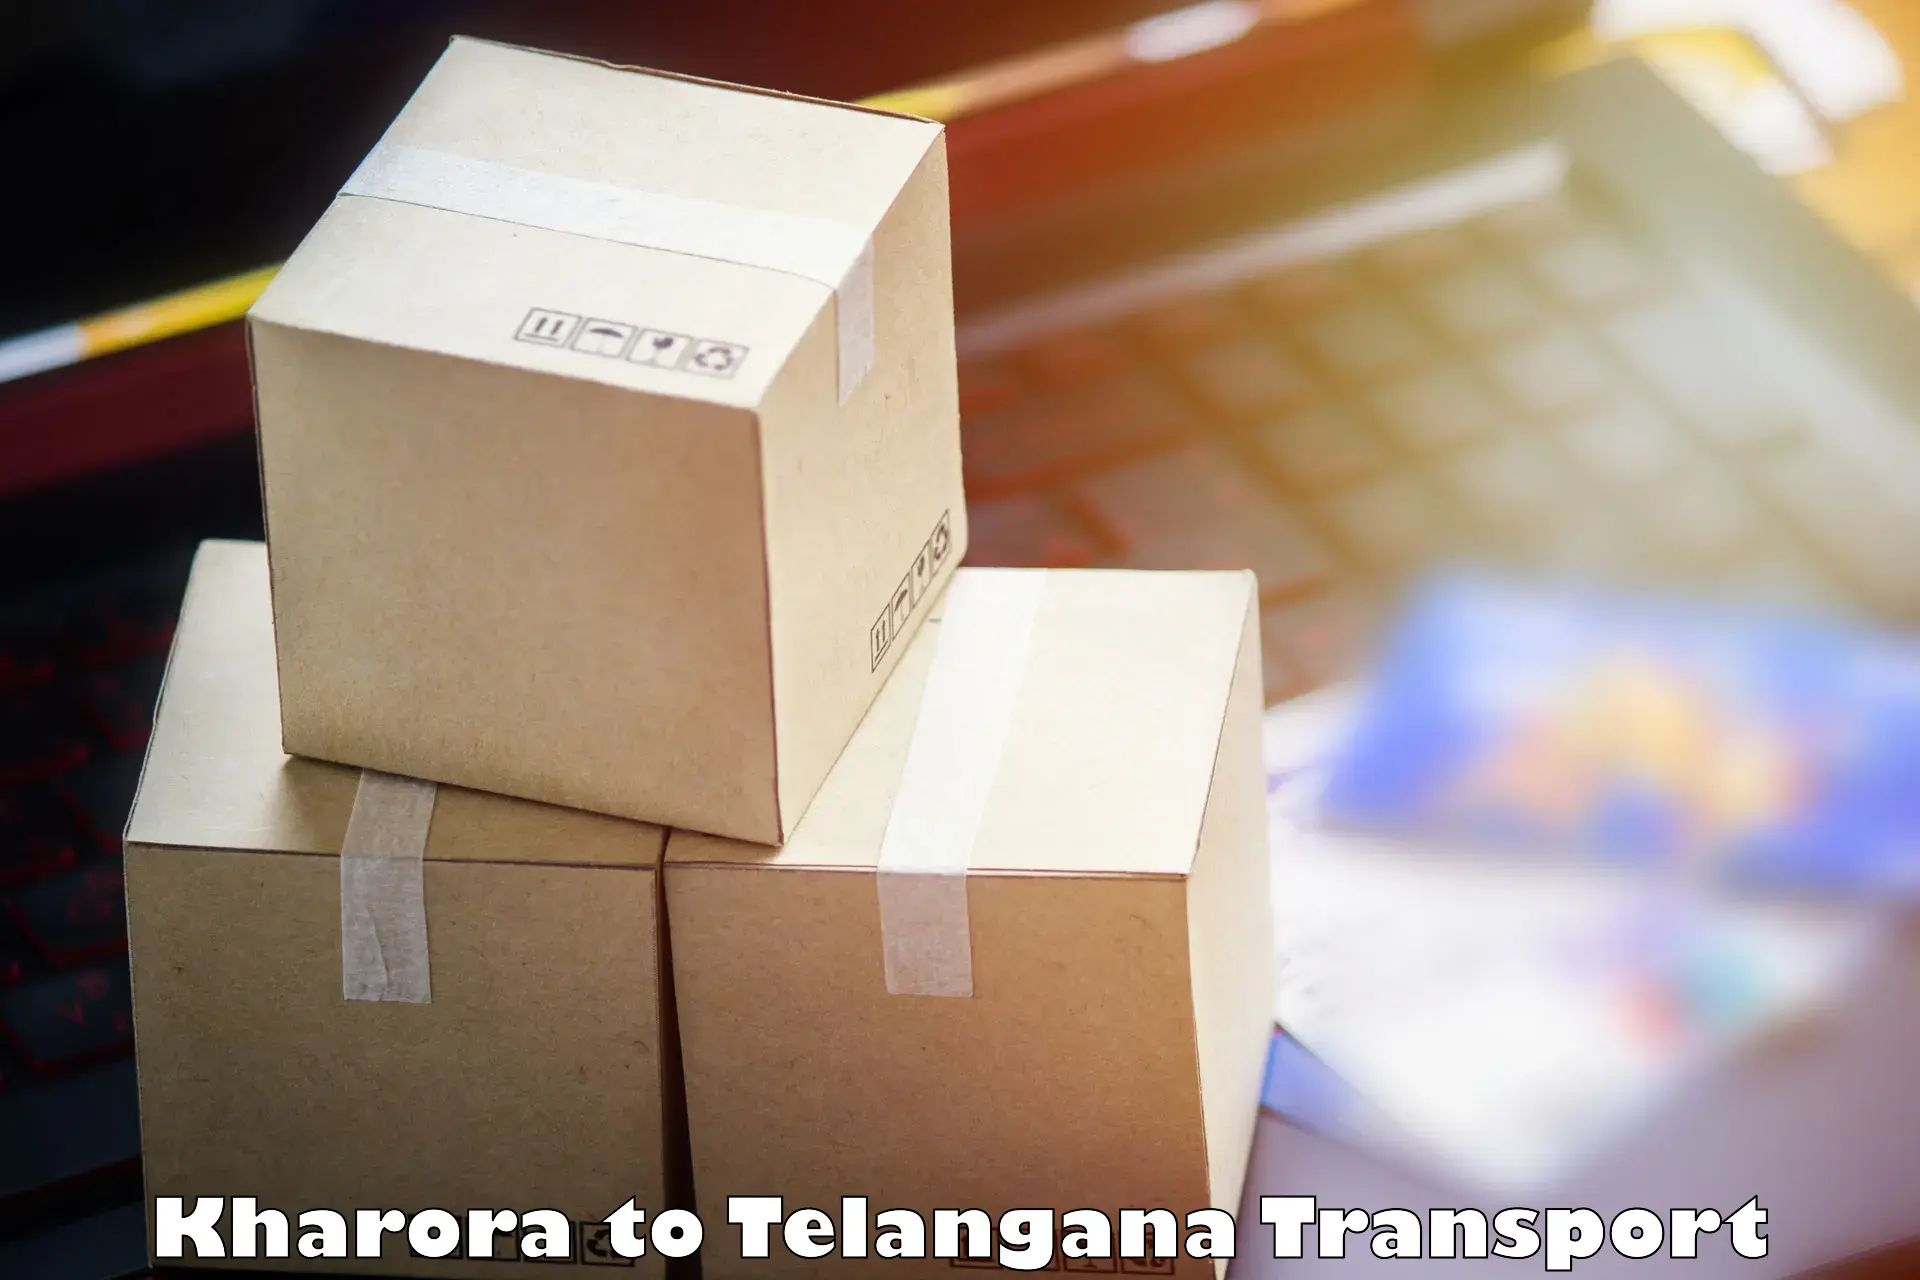 Daily parcel service transport in Kharora to Dahegaon